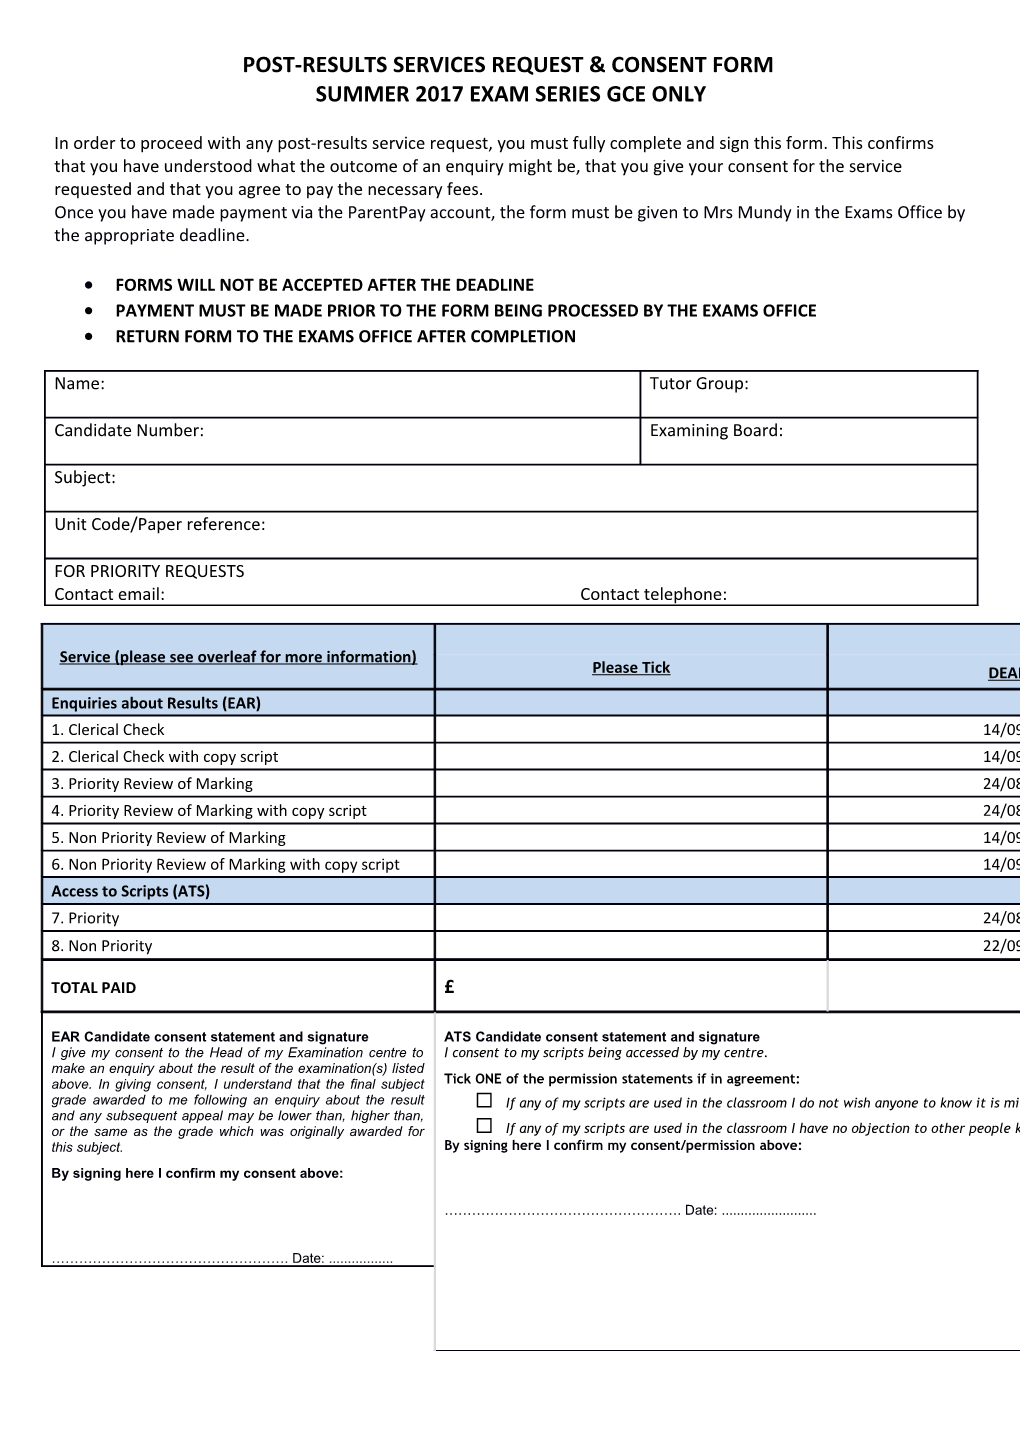 Post-Results Services Request & Consent Form